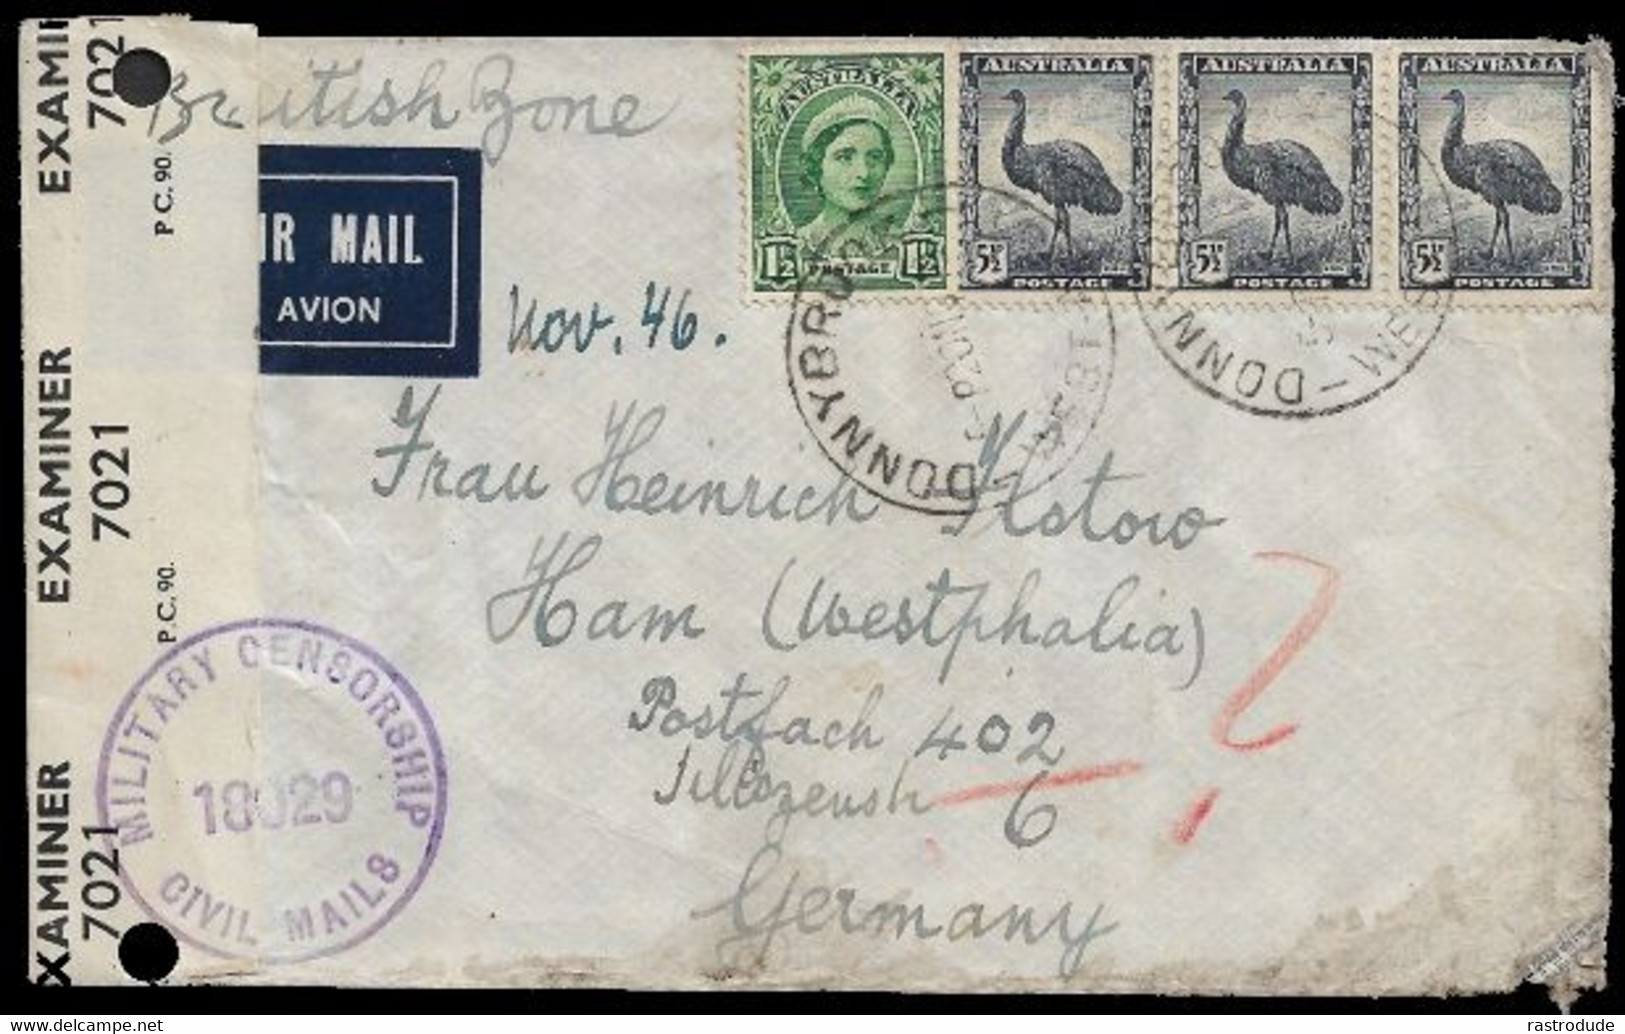 1946 AUSTRALIA - CENSOR COVER FROM DONNYBROOK (SMALL P.O) TO BERLIN, GERMANY - BRITISH ZONE - MILITARY CENSORSHIP - Covers & Documents